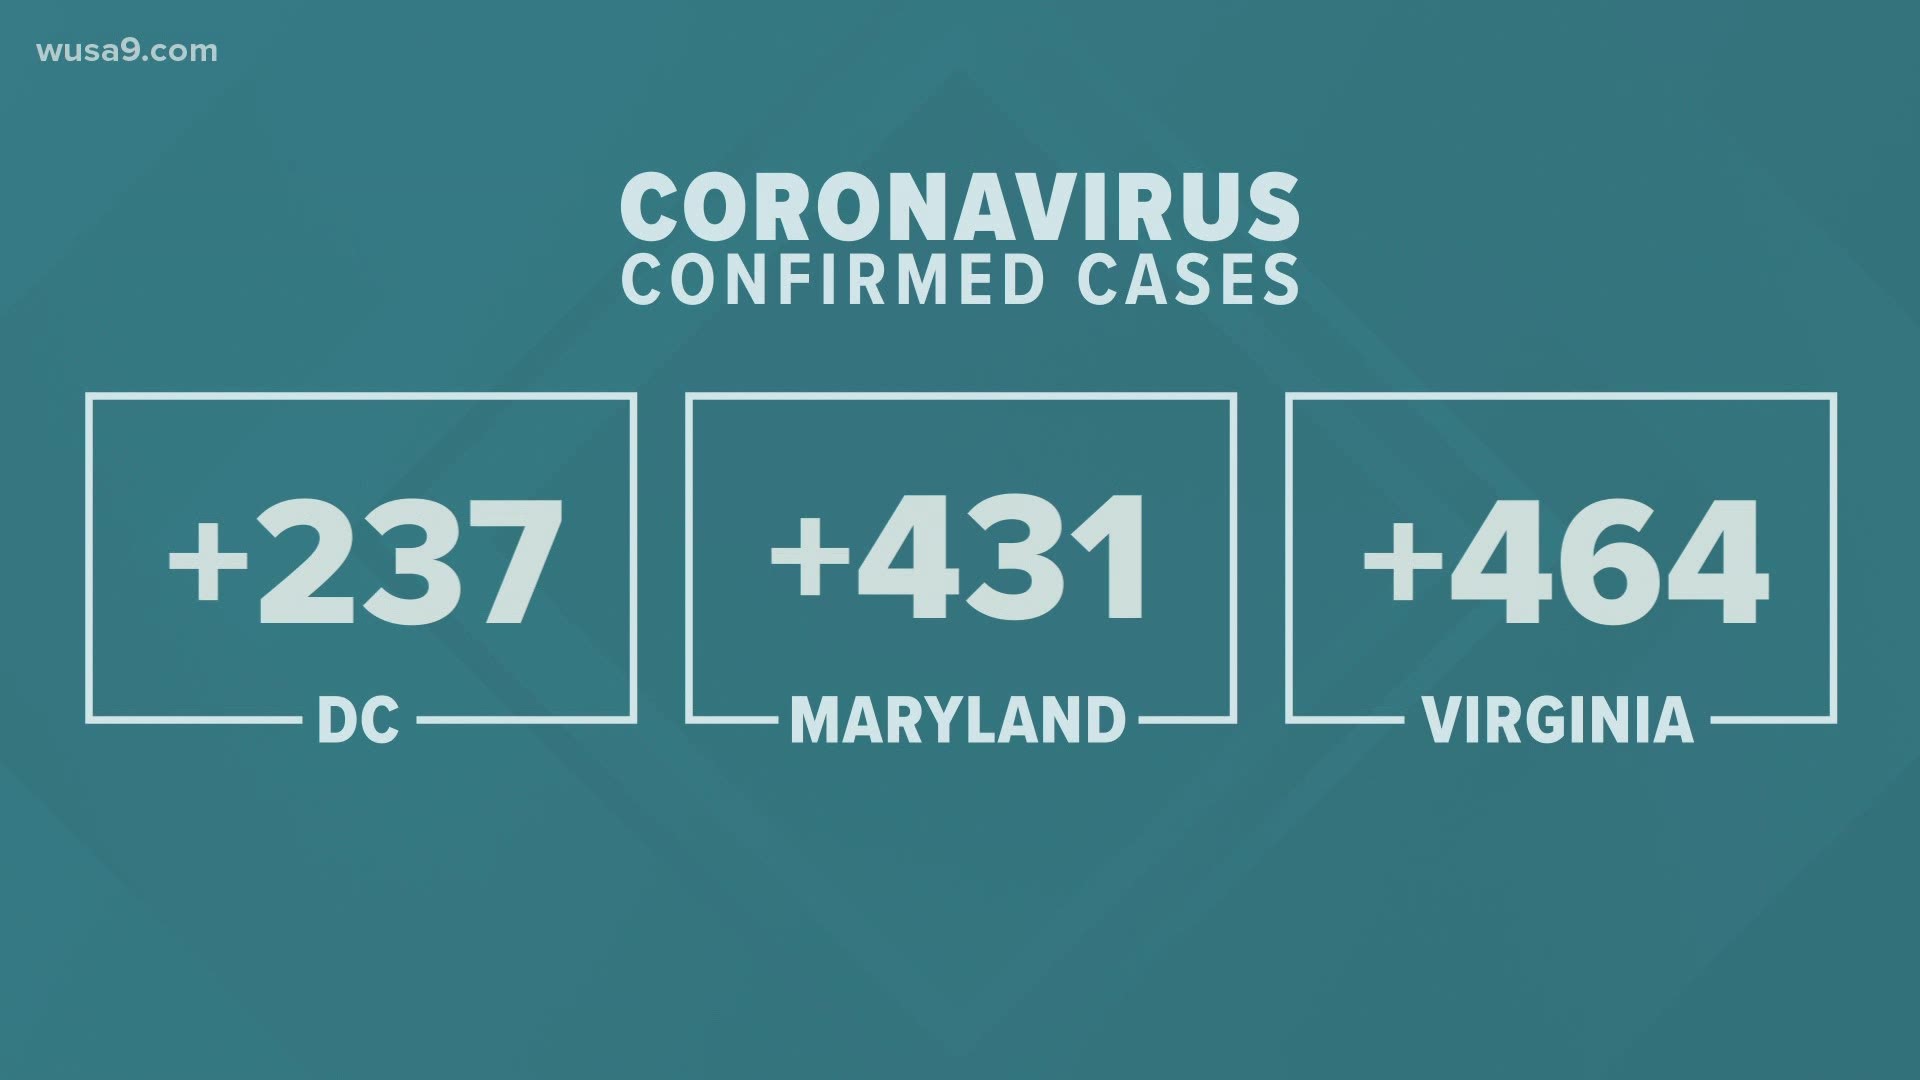 Here are the latest details on the coronavirus outbreak and reopening plans in the DMV.